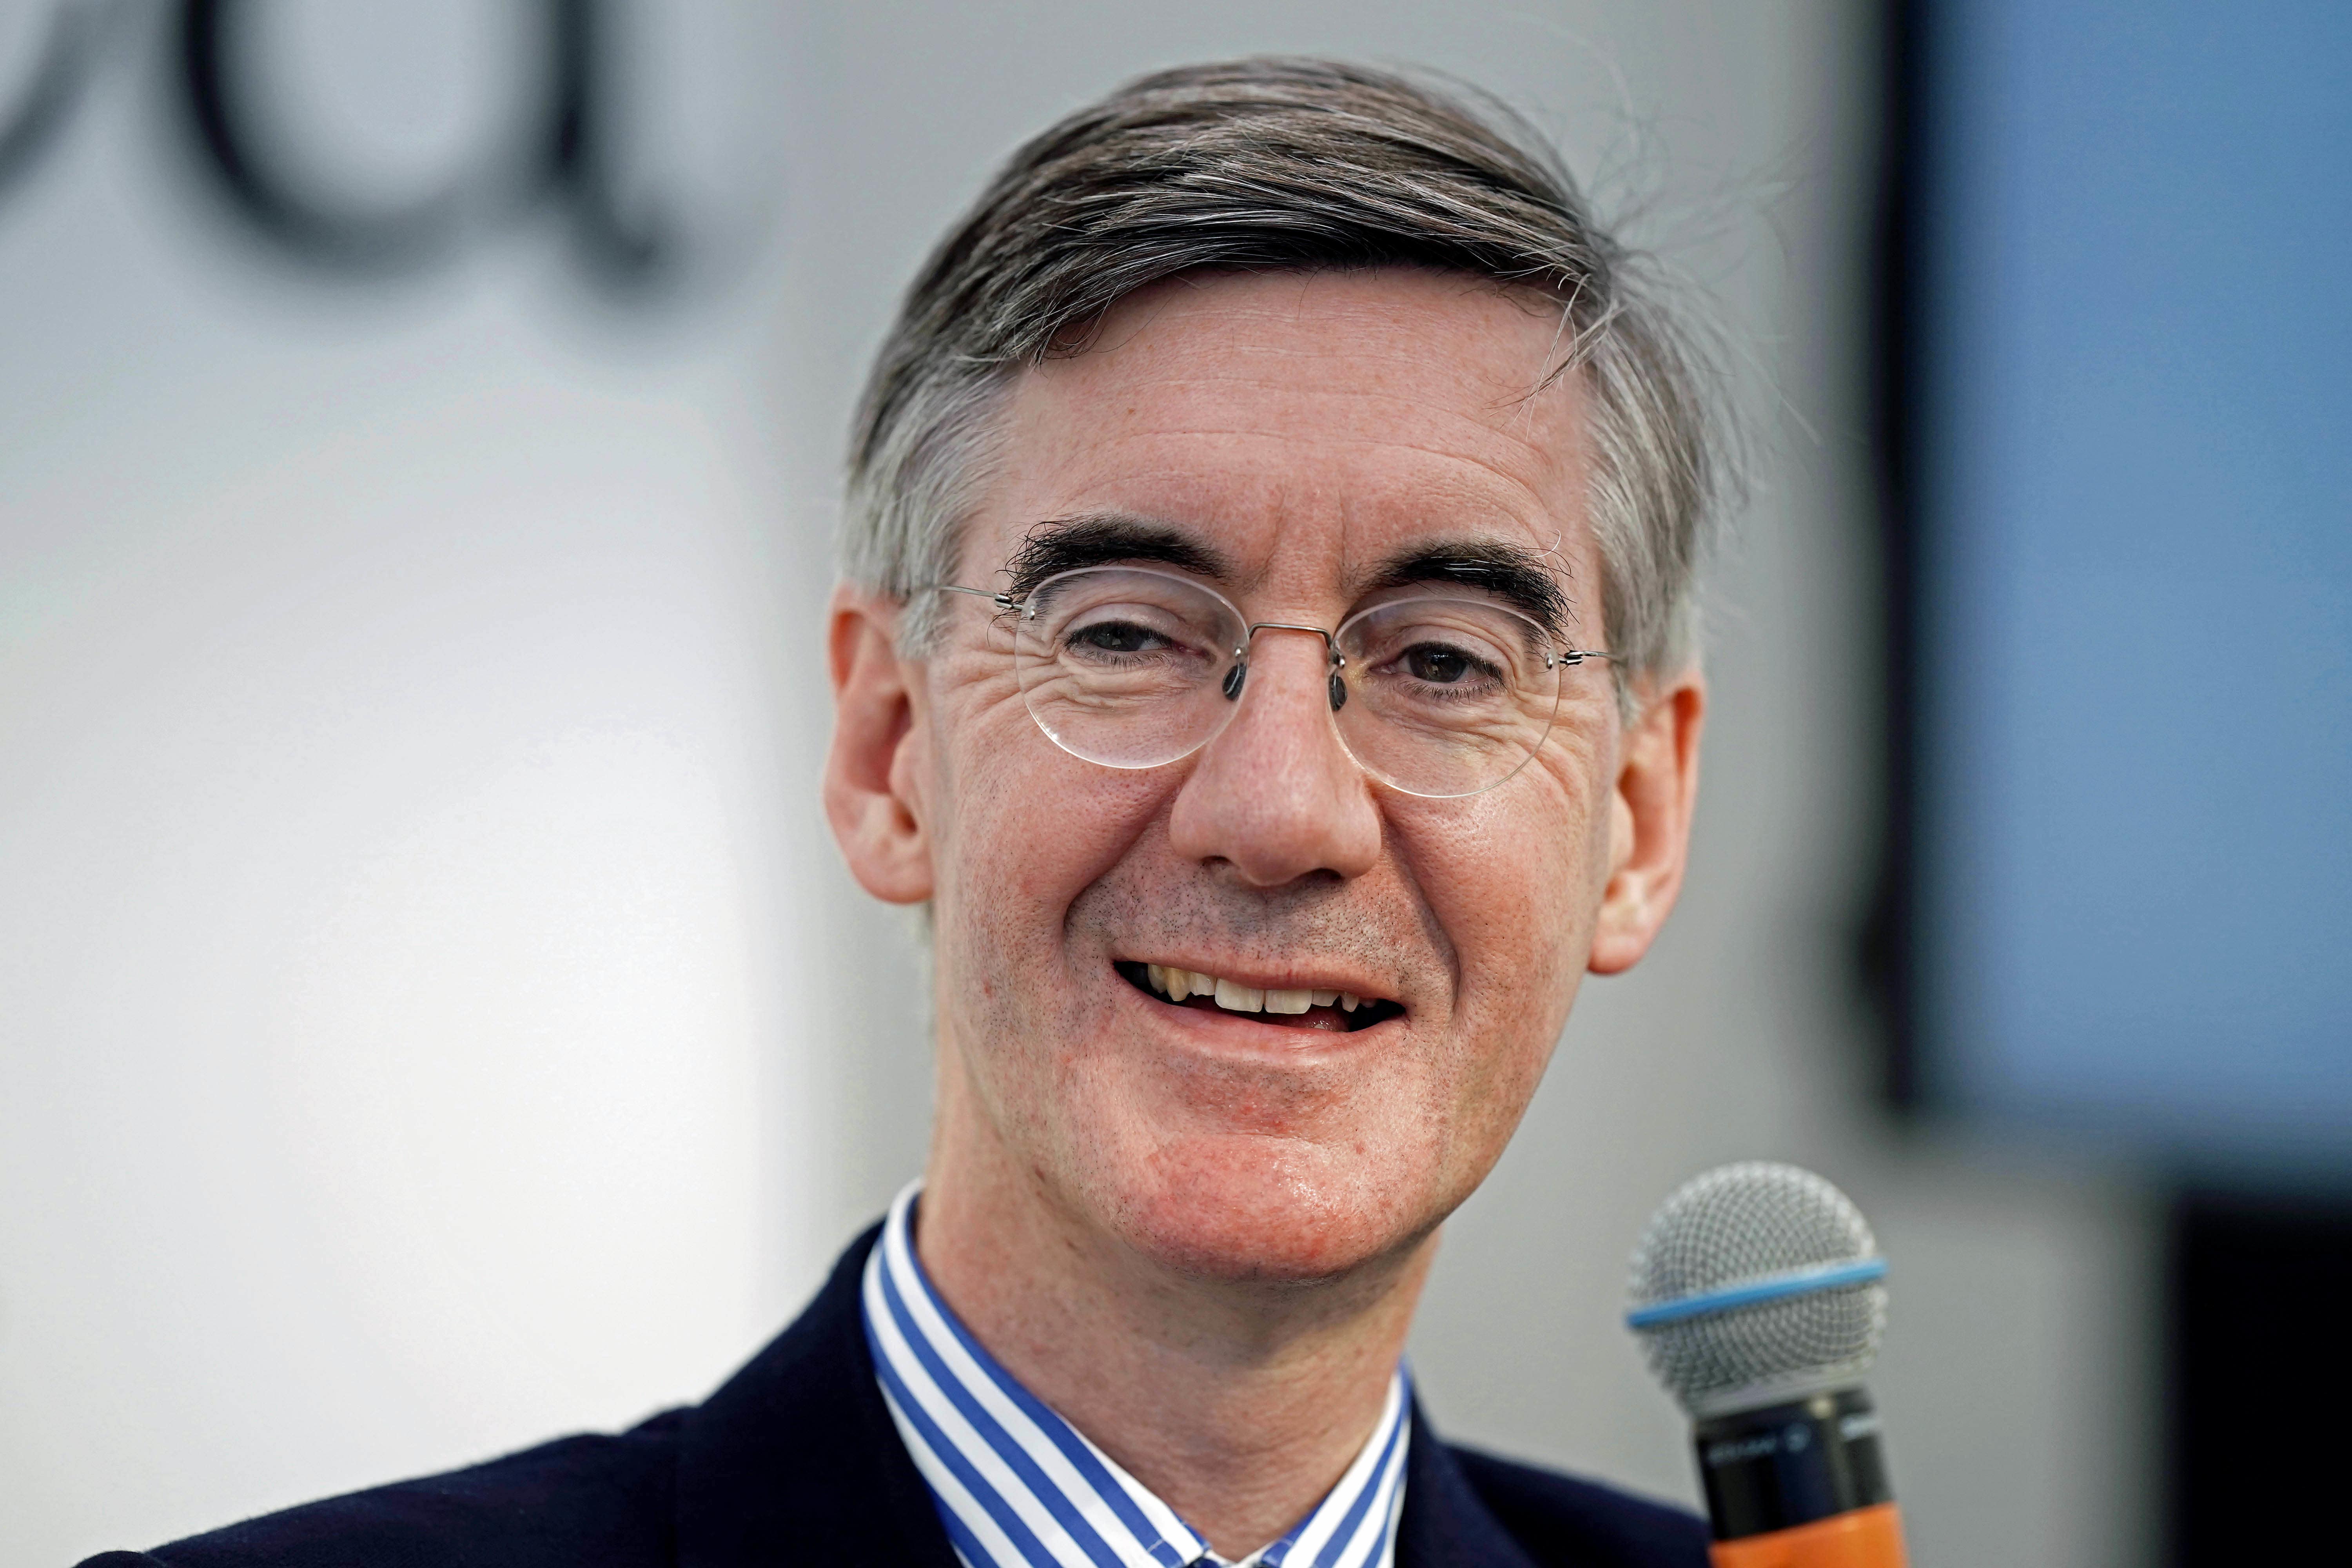 Jacob Rees-Mogg defended the ‘lettuce list’ as political tradition